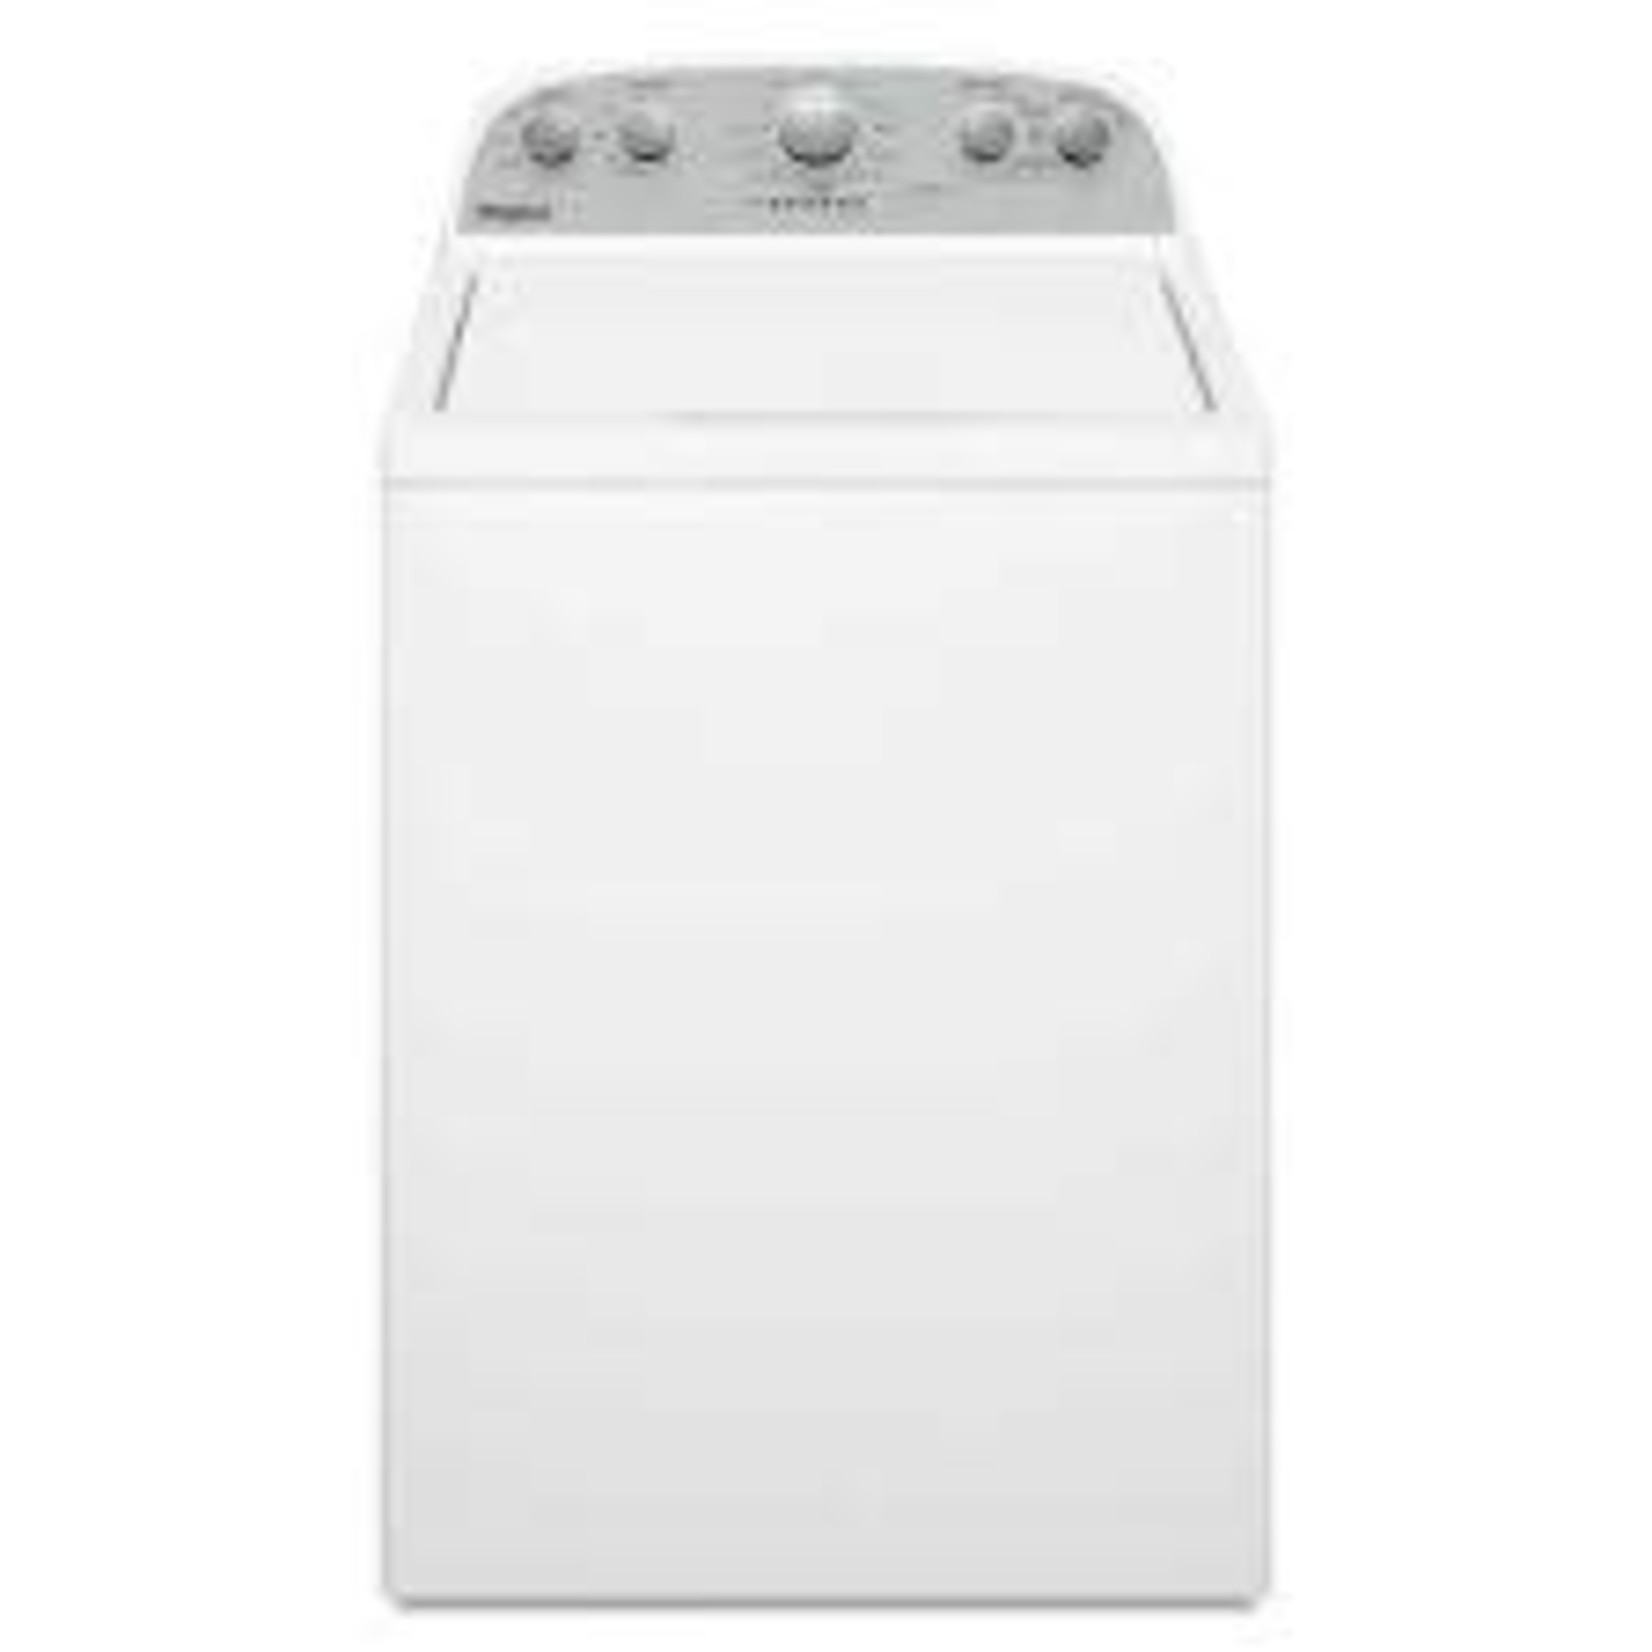 Whirlpool WHIRLPOOL 3.8 Cu. Ft. Top Load Washer WTW4955HW CC0200946; NO CREDIT NEEDED FINANCE OPTIONS!!!